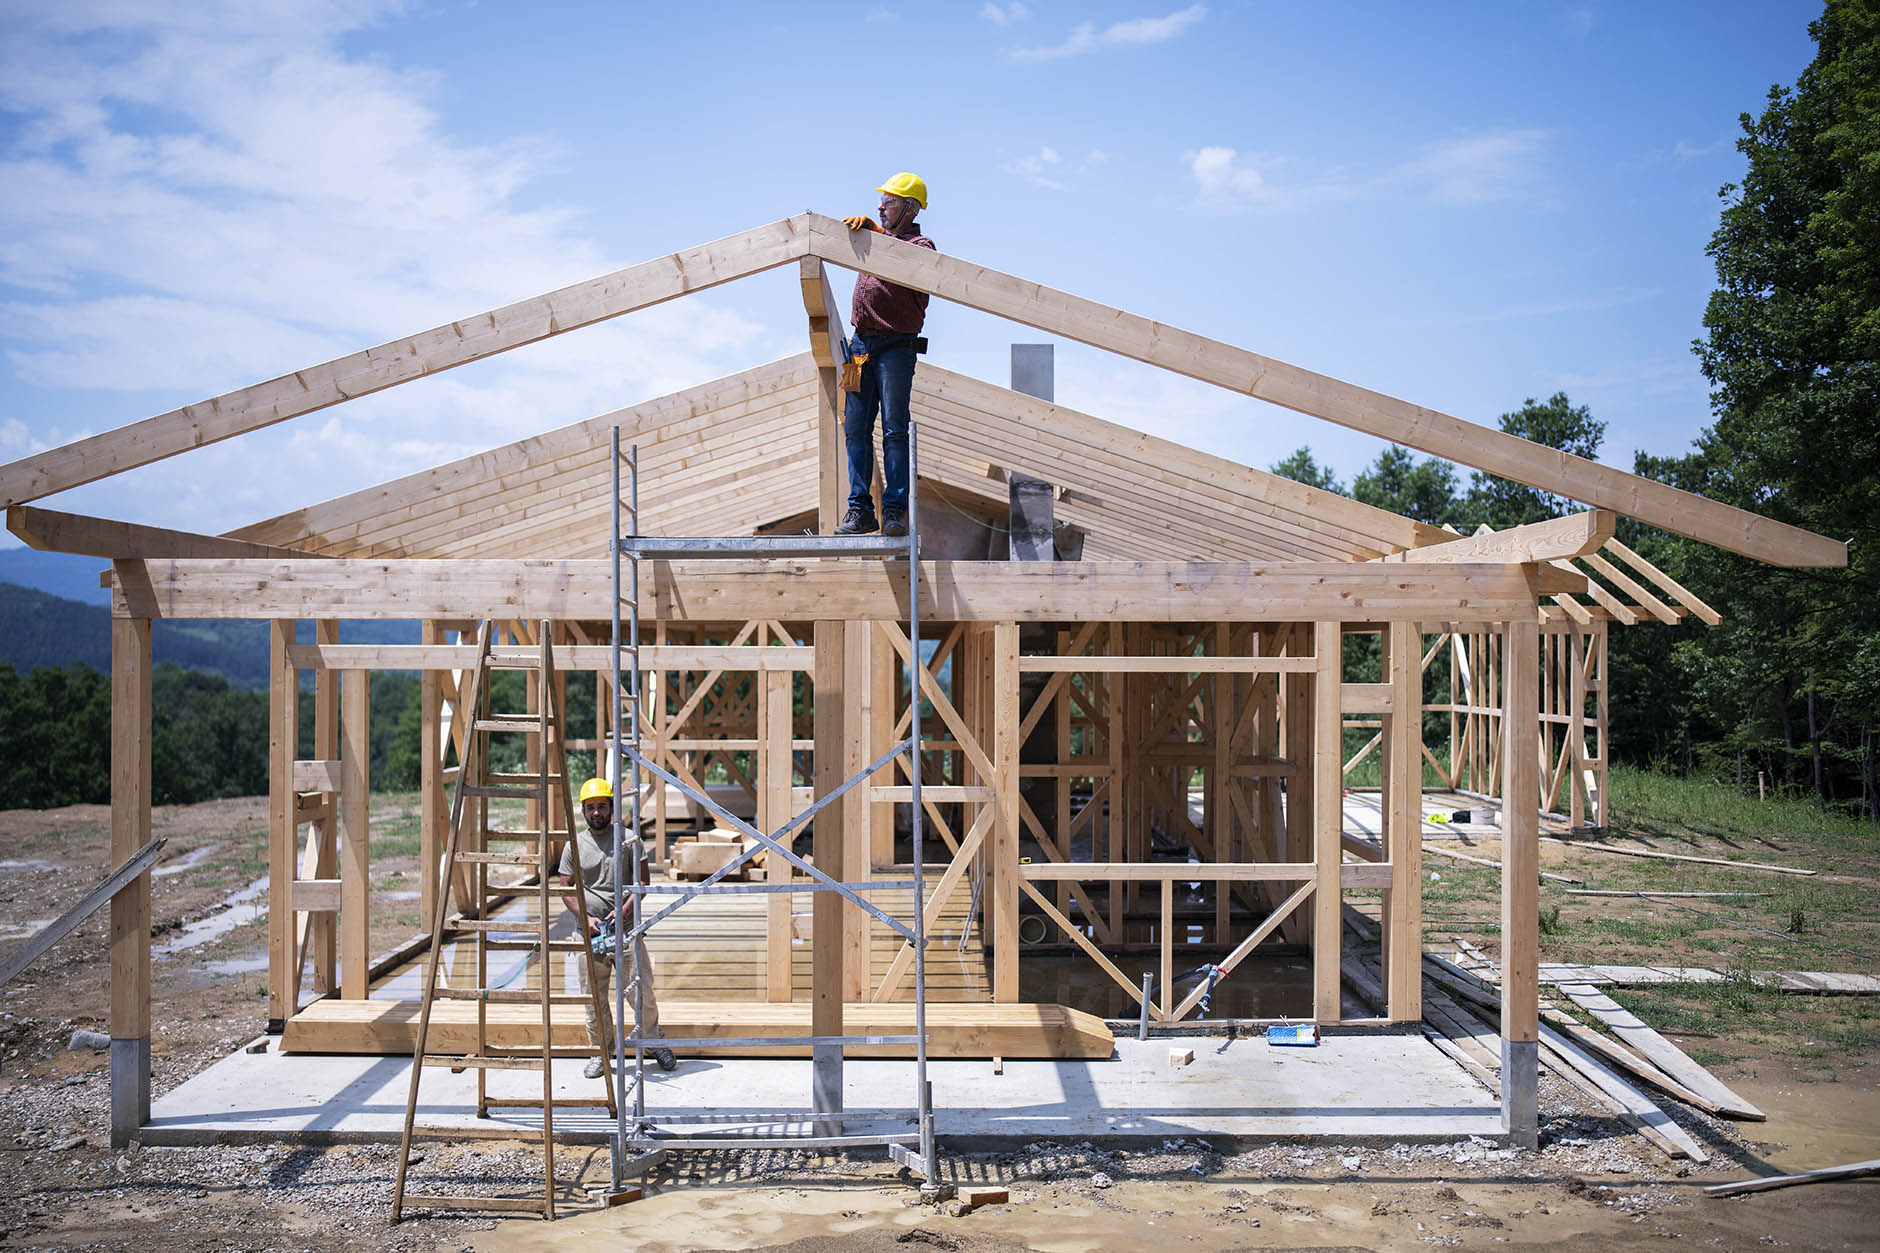 No reprieve for home builders as construction costs continue rising